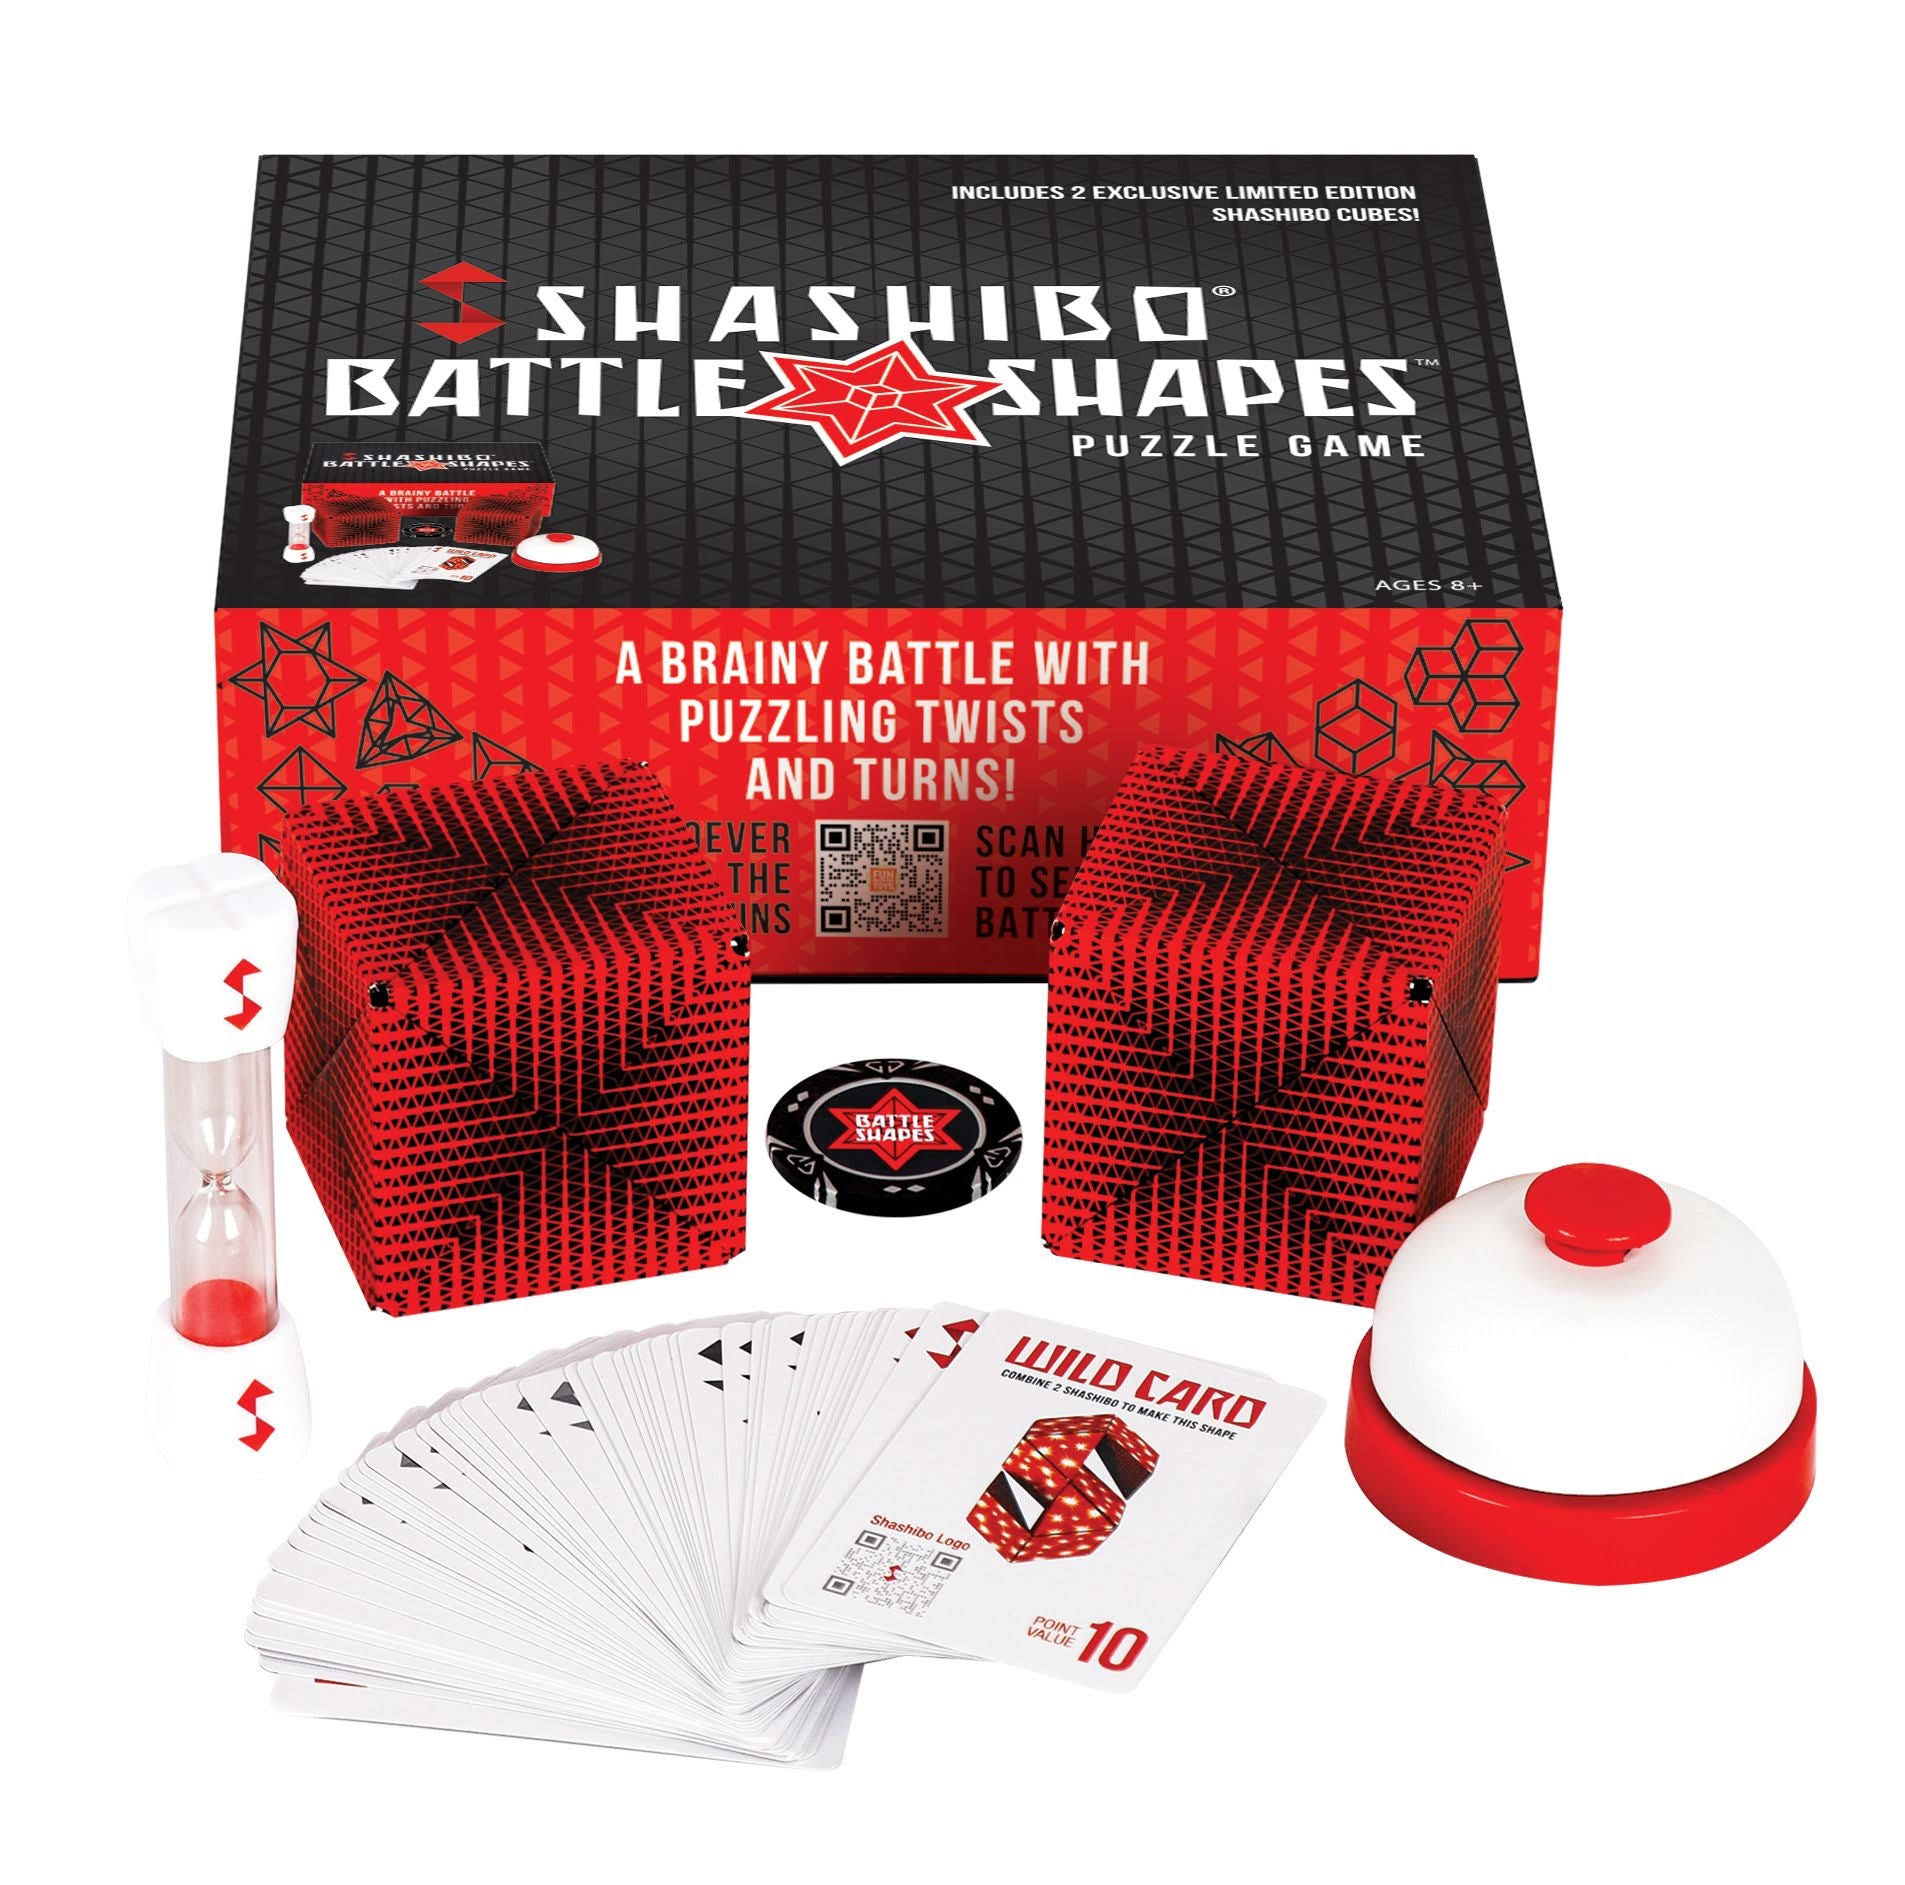 Shashibo Battle Shapes Magnetizing Puzzle Game – Play Solo Or With A Friend - Challenging Shape Shifting Box Game For Adults & Kids Ages 8+ With